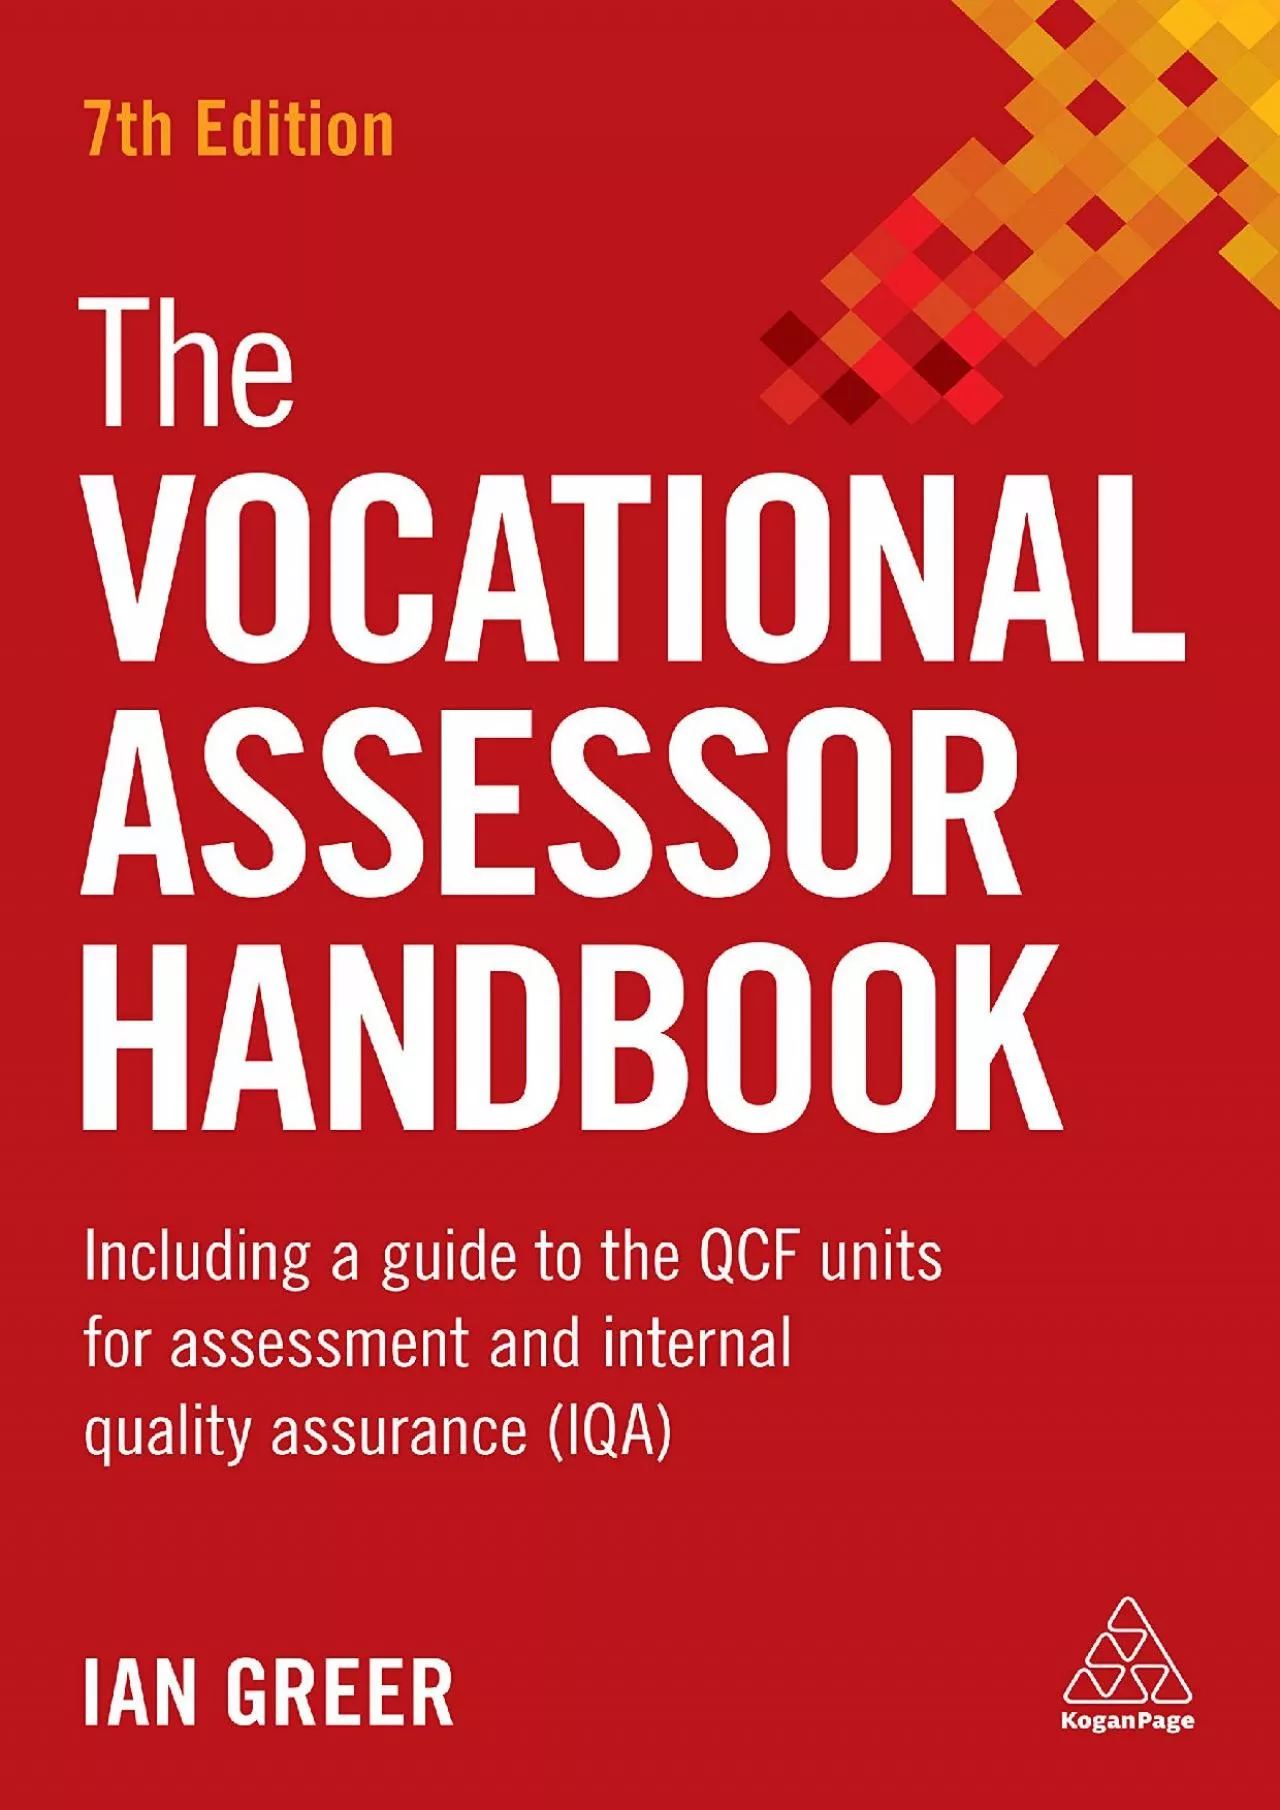 [READ] The Vocational Assessor Handbook: Including a Guide to the QCF Units for Assessment